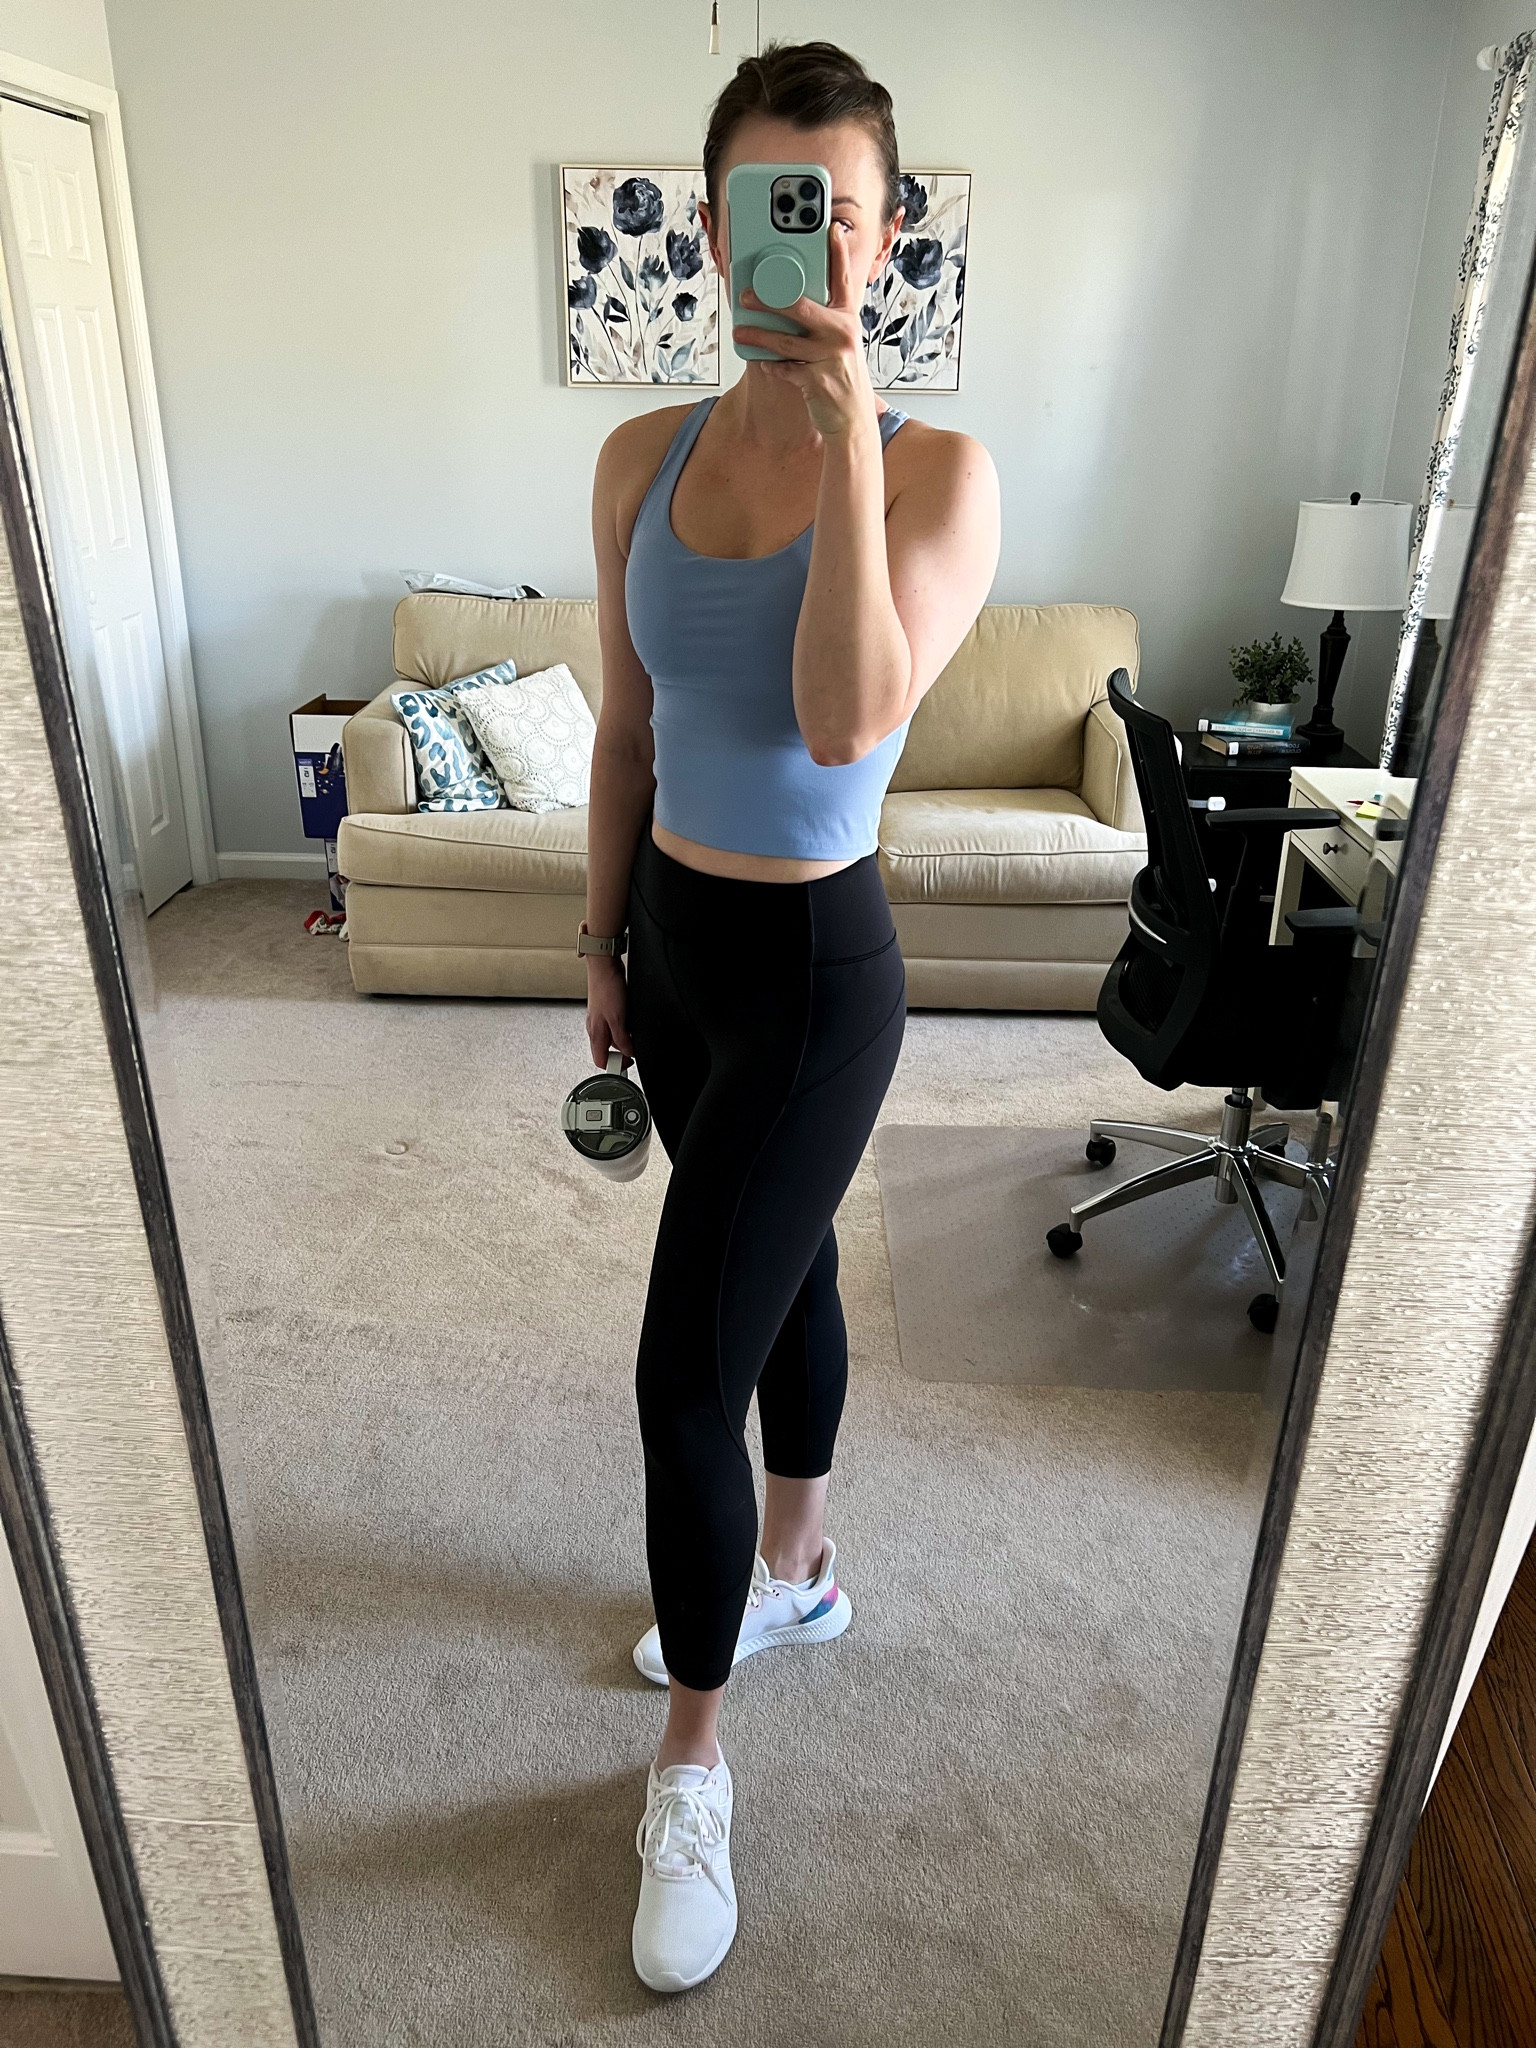 Best Padding Replacement for White Align Tank! : r/lululemon